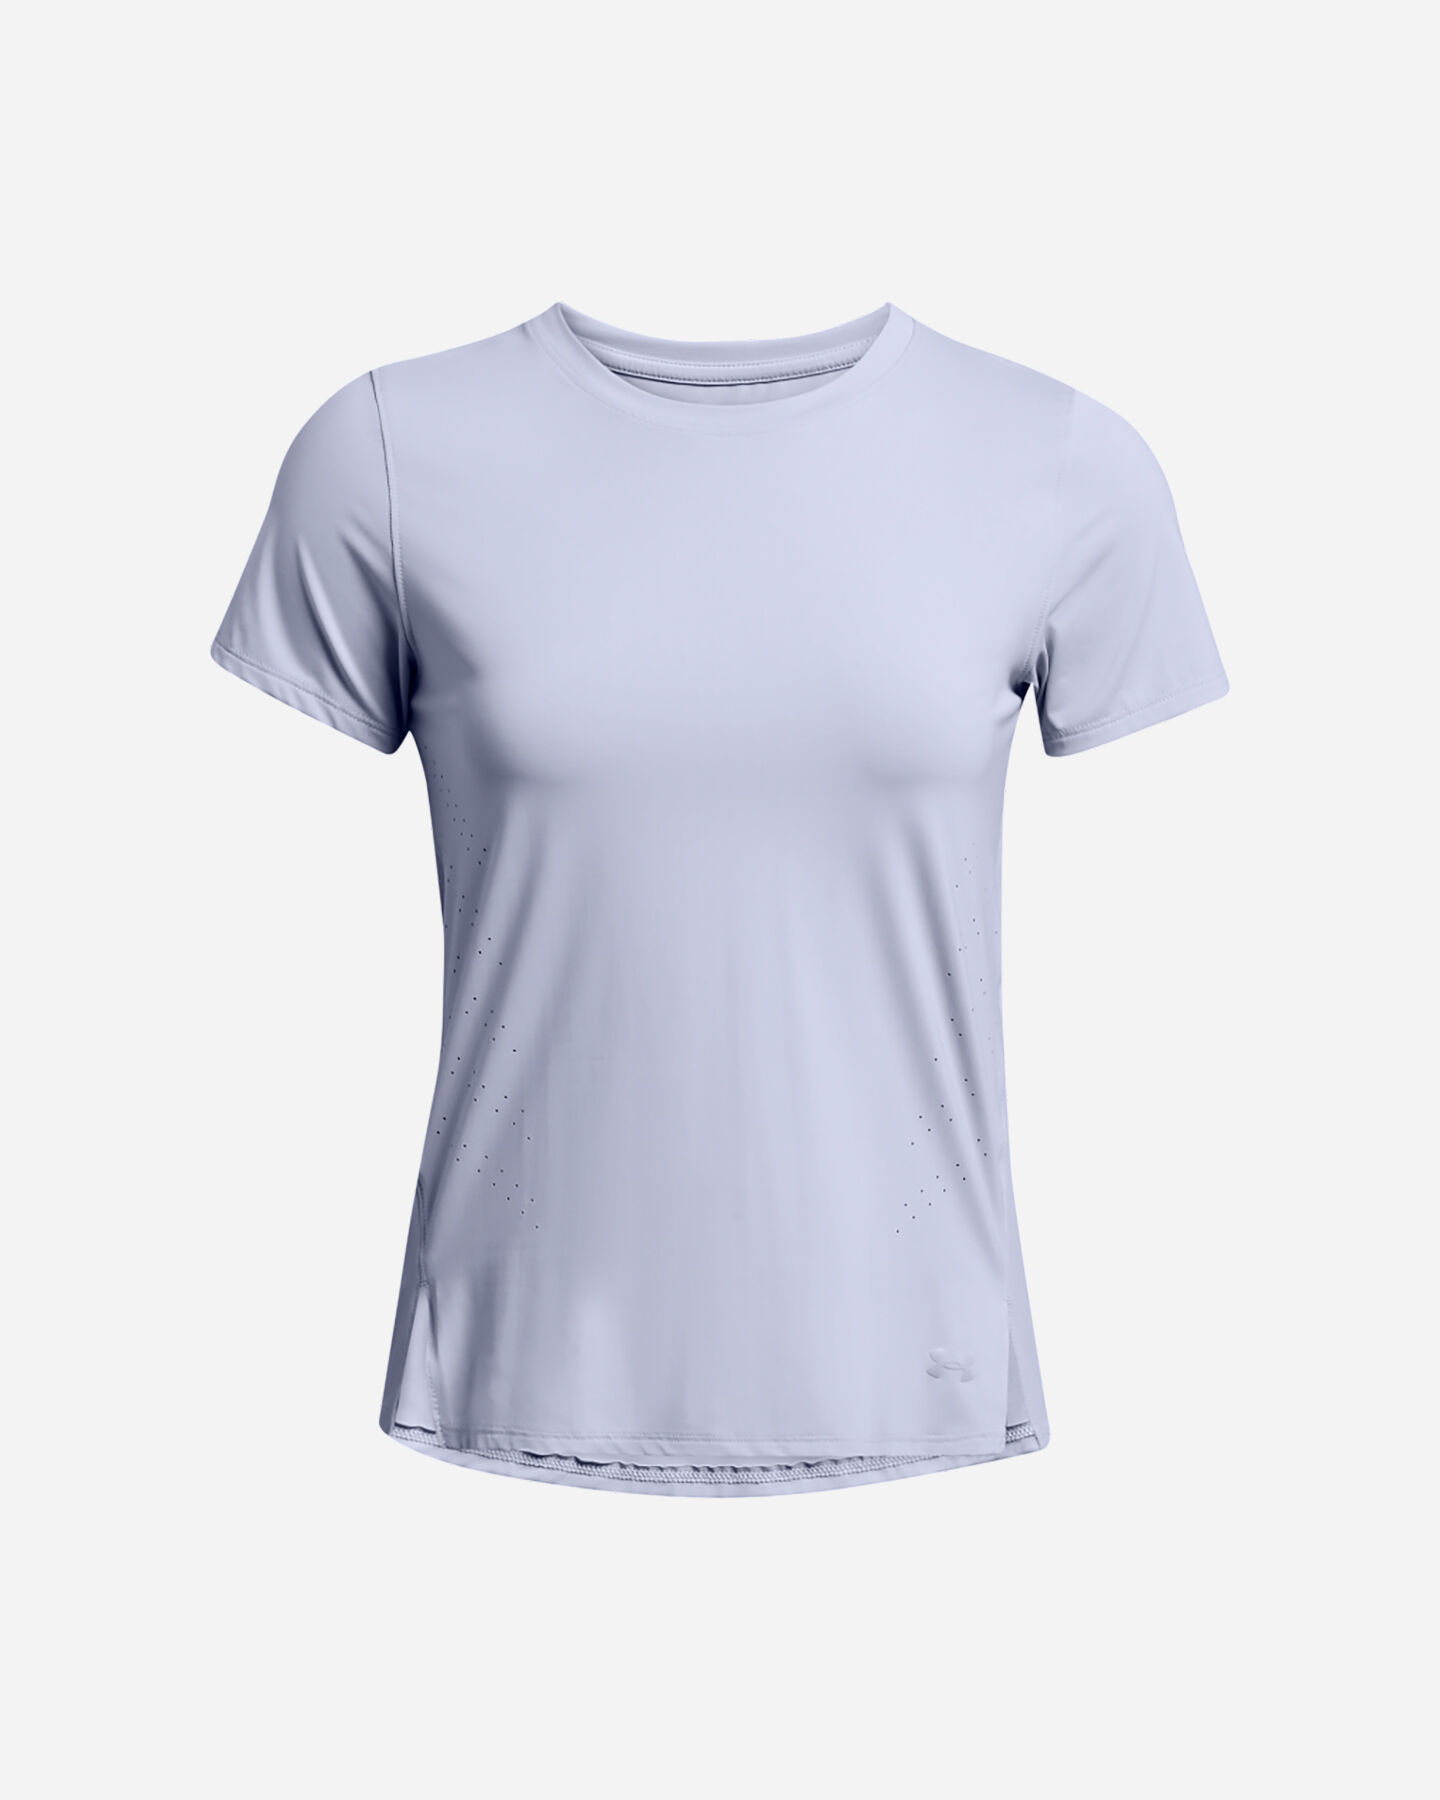  T-Shirt running UNDER ARMOUR LAUNCH ELITE W S5641837|0539|XS scatto 0